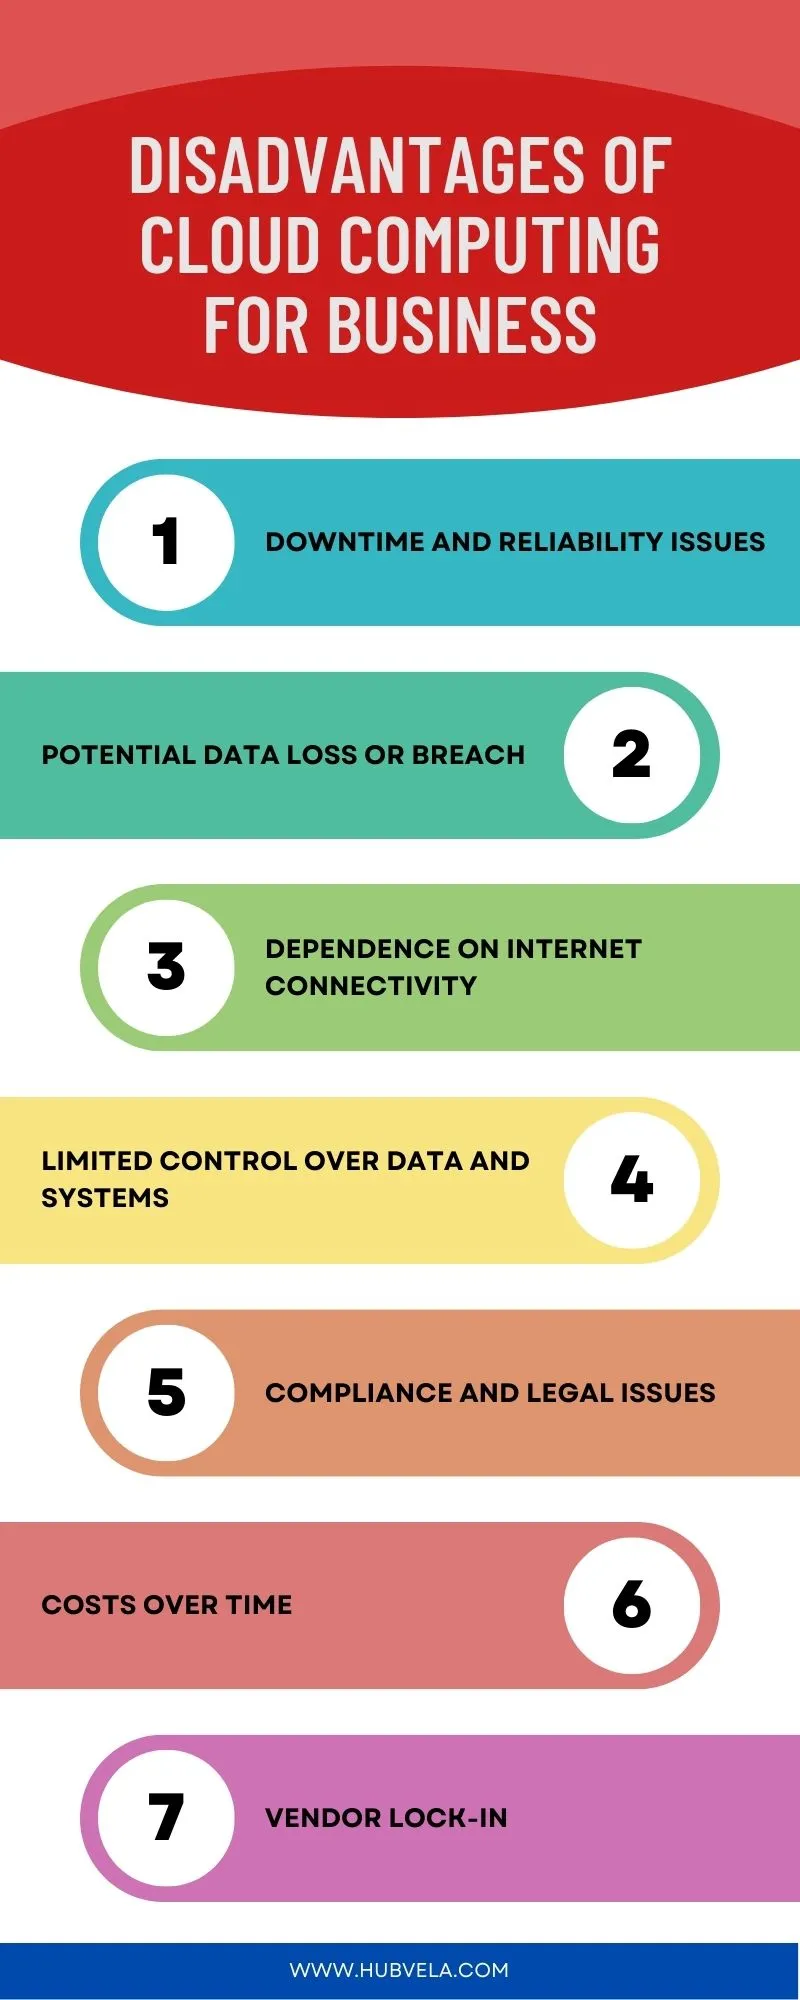 Disadvantages of Cloud Computing for Business Infographic